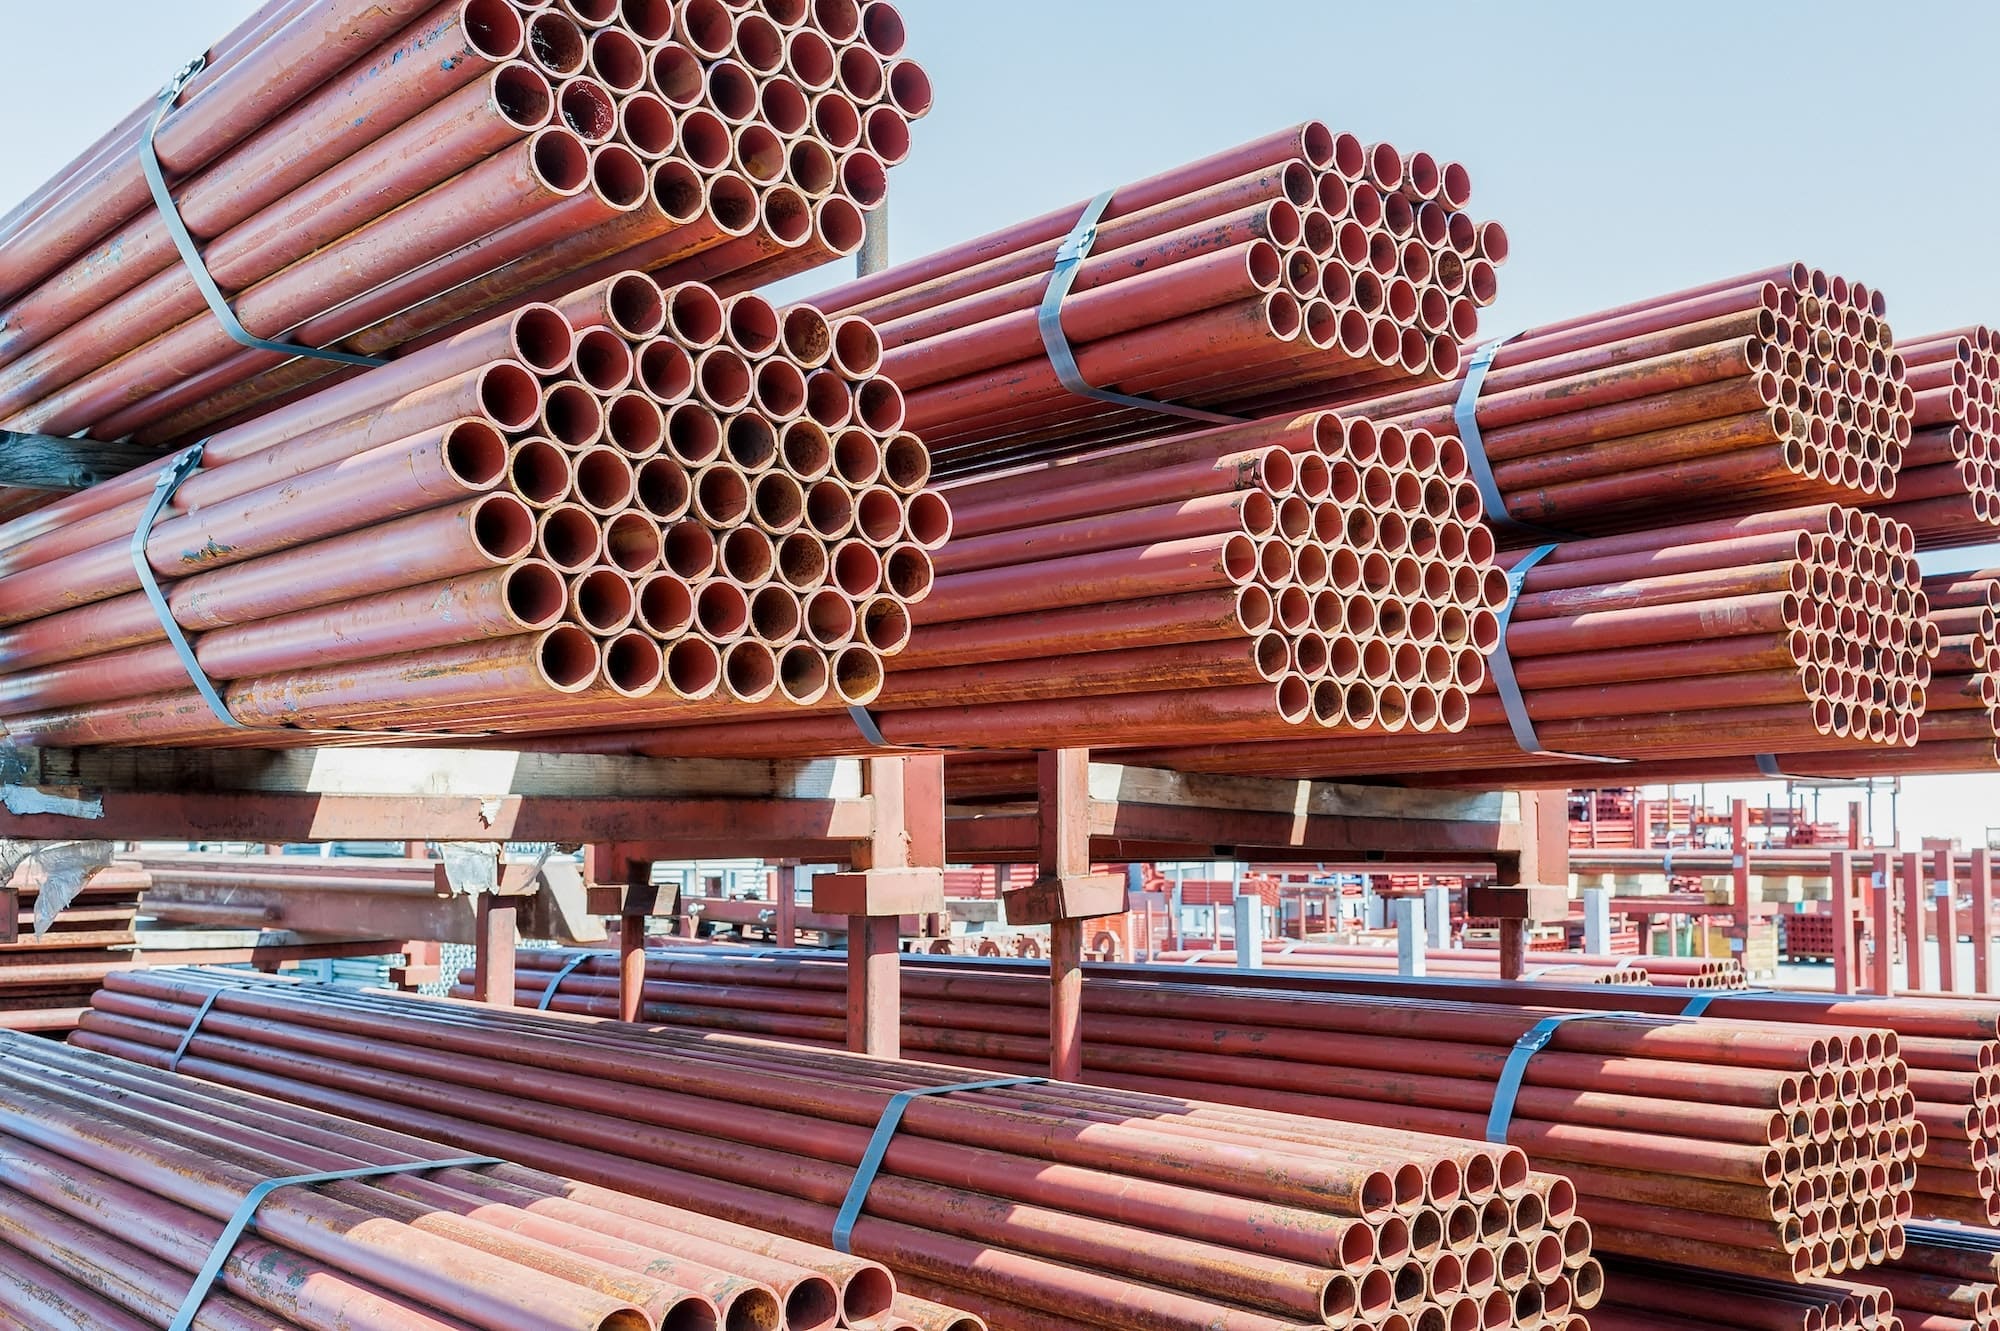 Stack of steel pipes for scaffolding in stock.